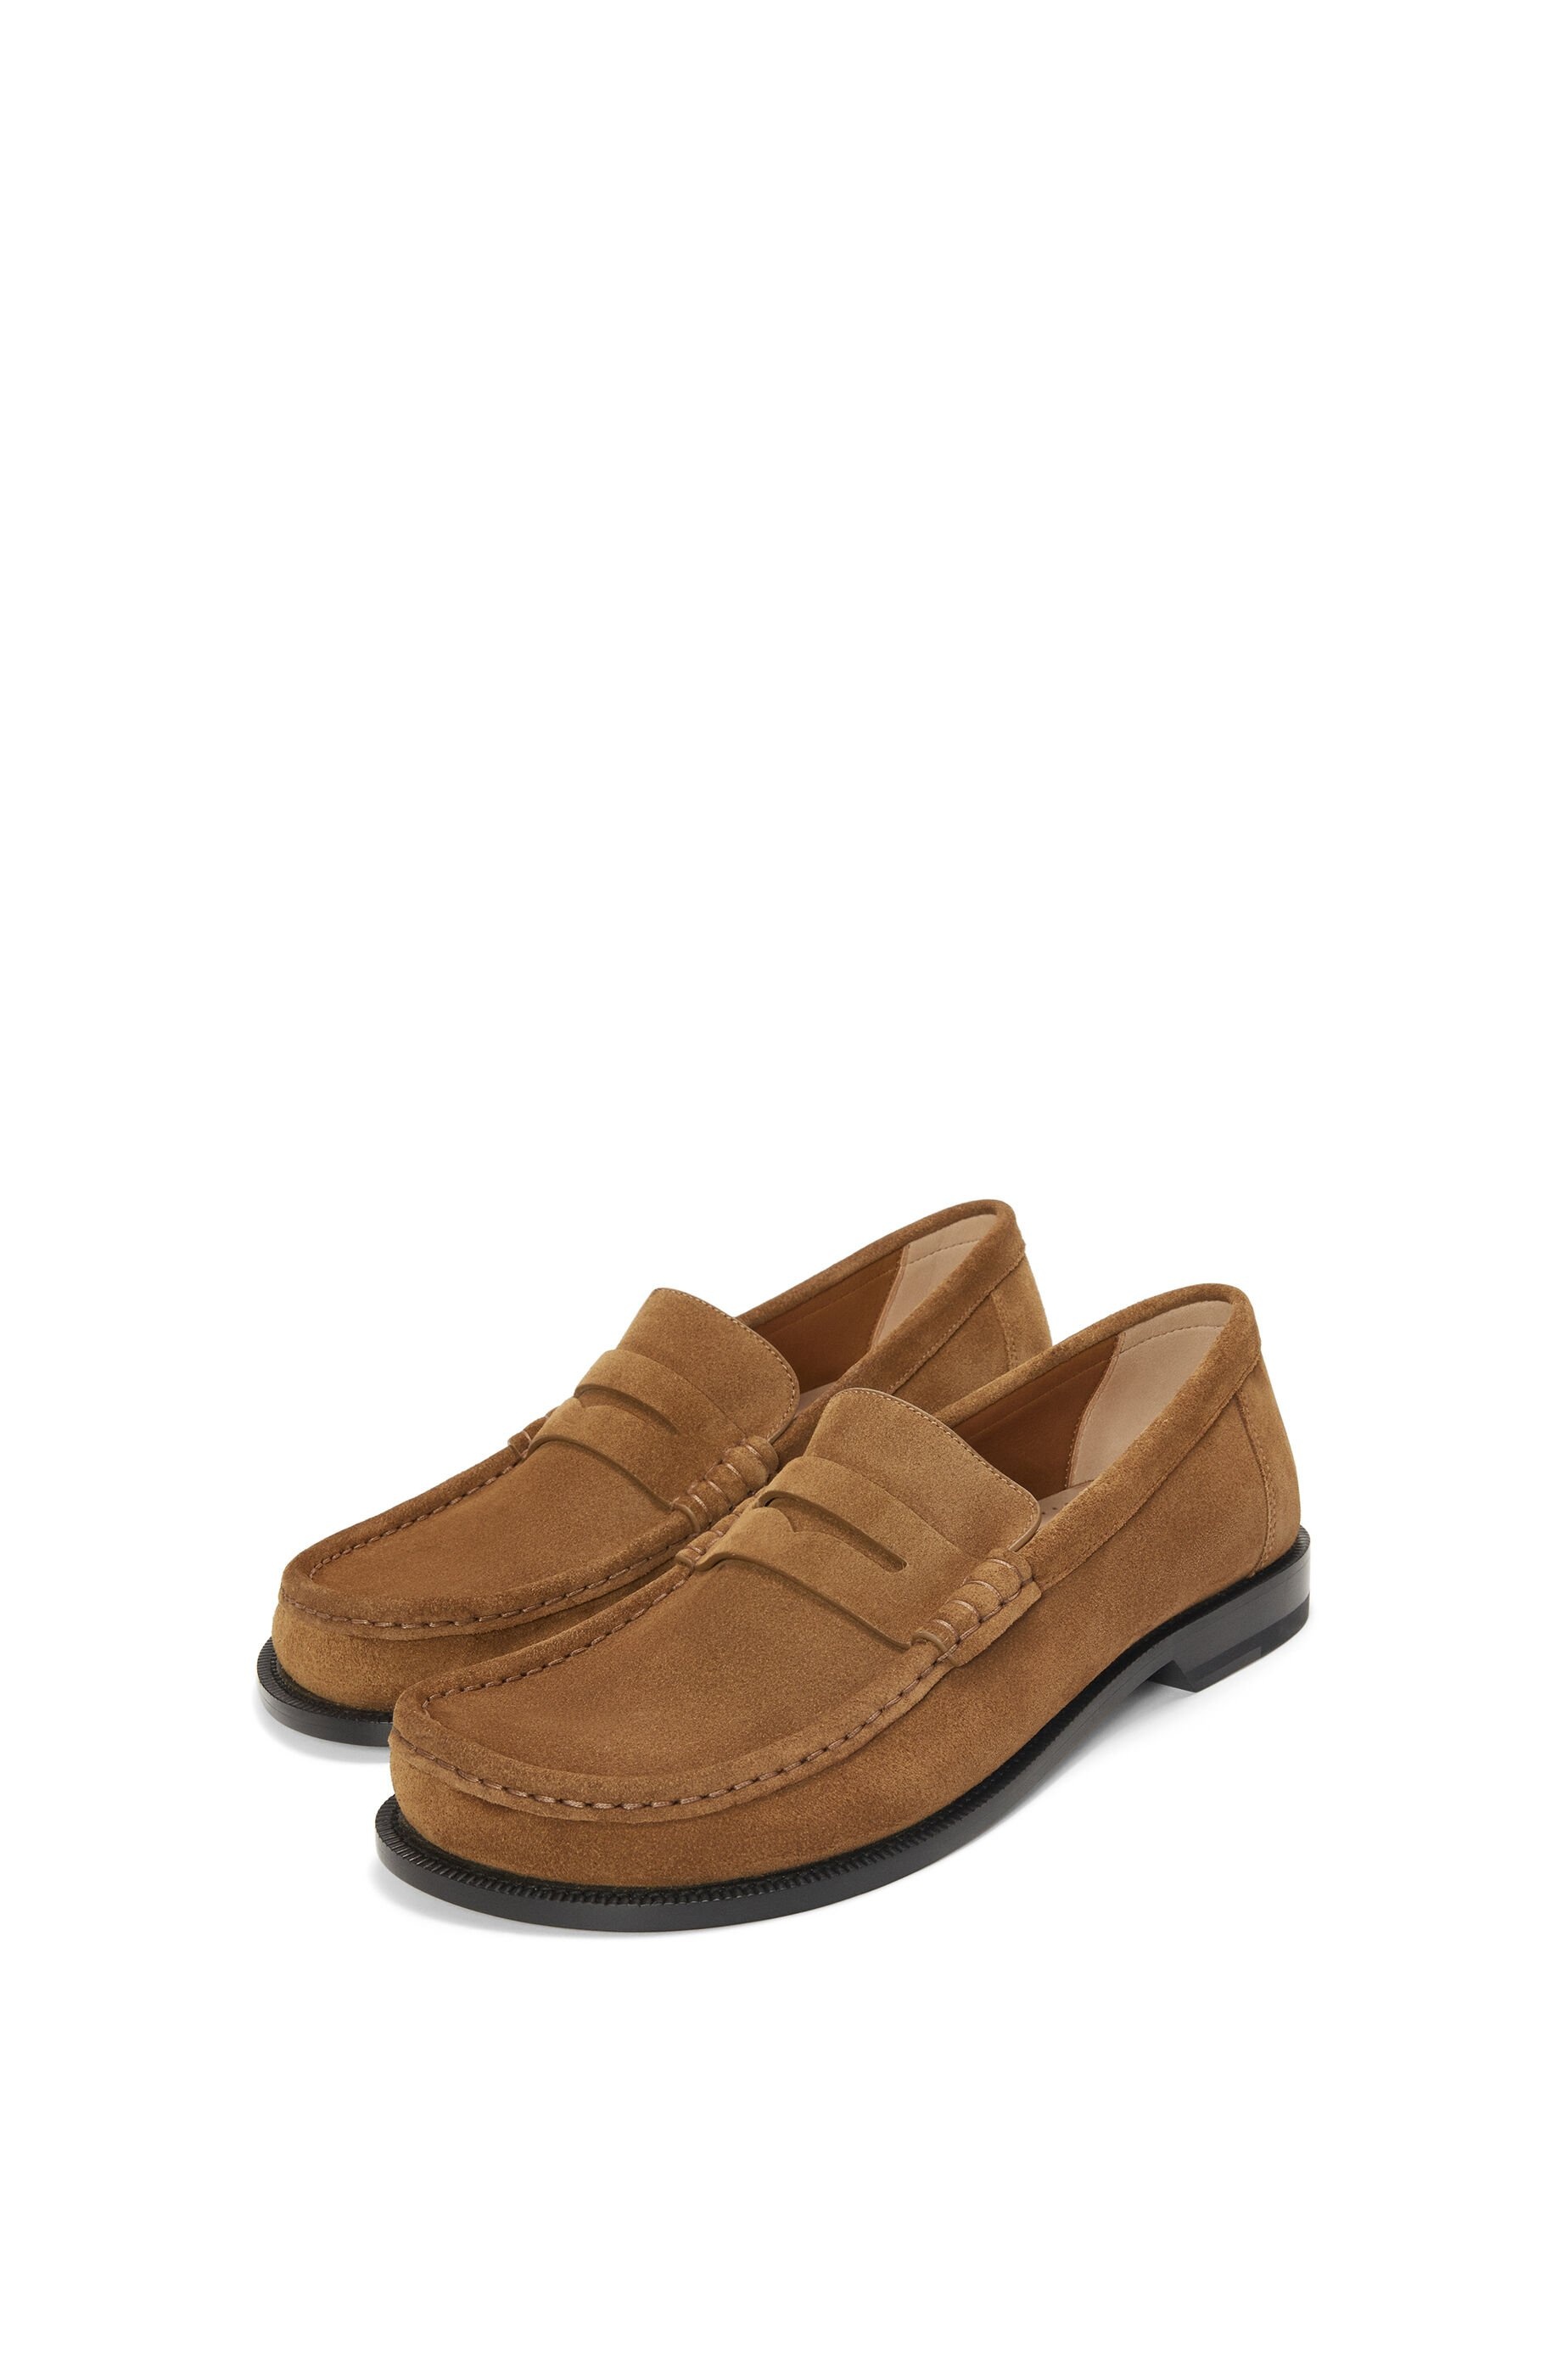 Campo loafer in suede calfskin - 3